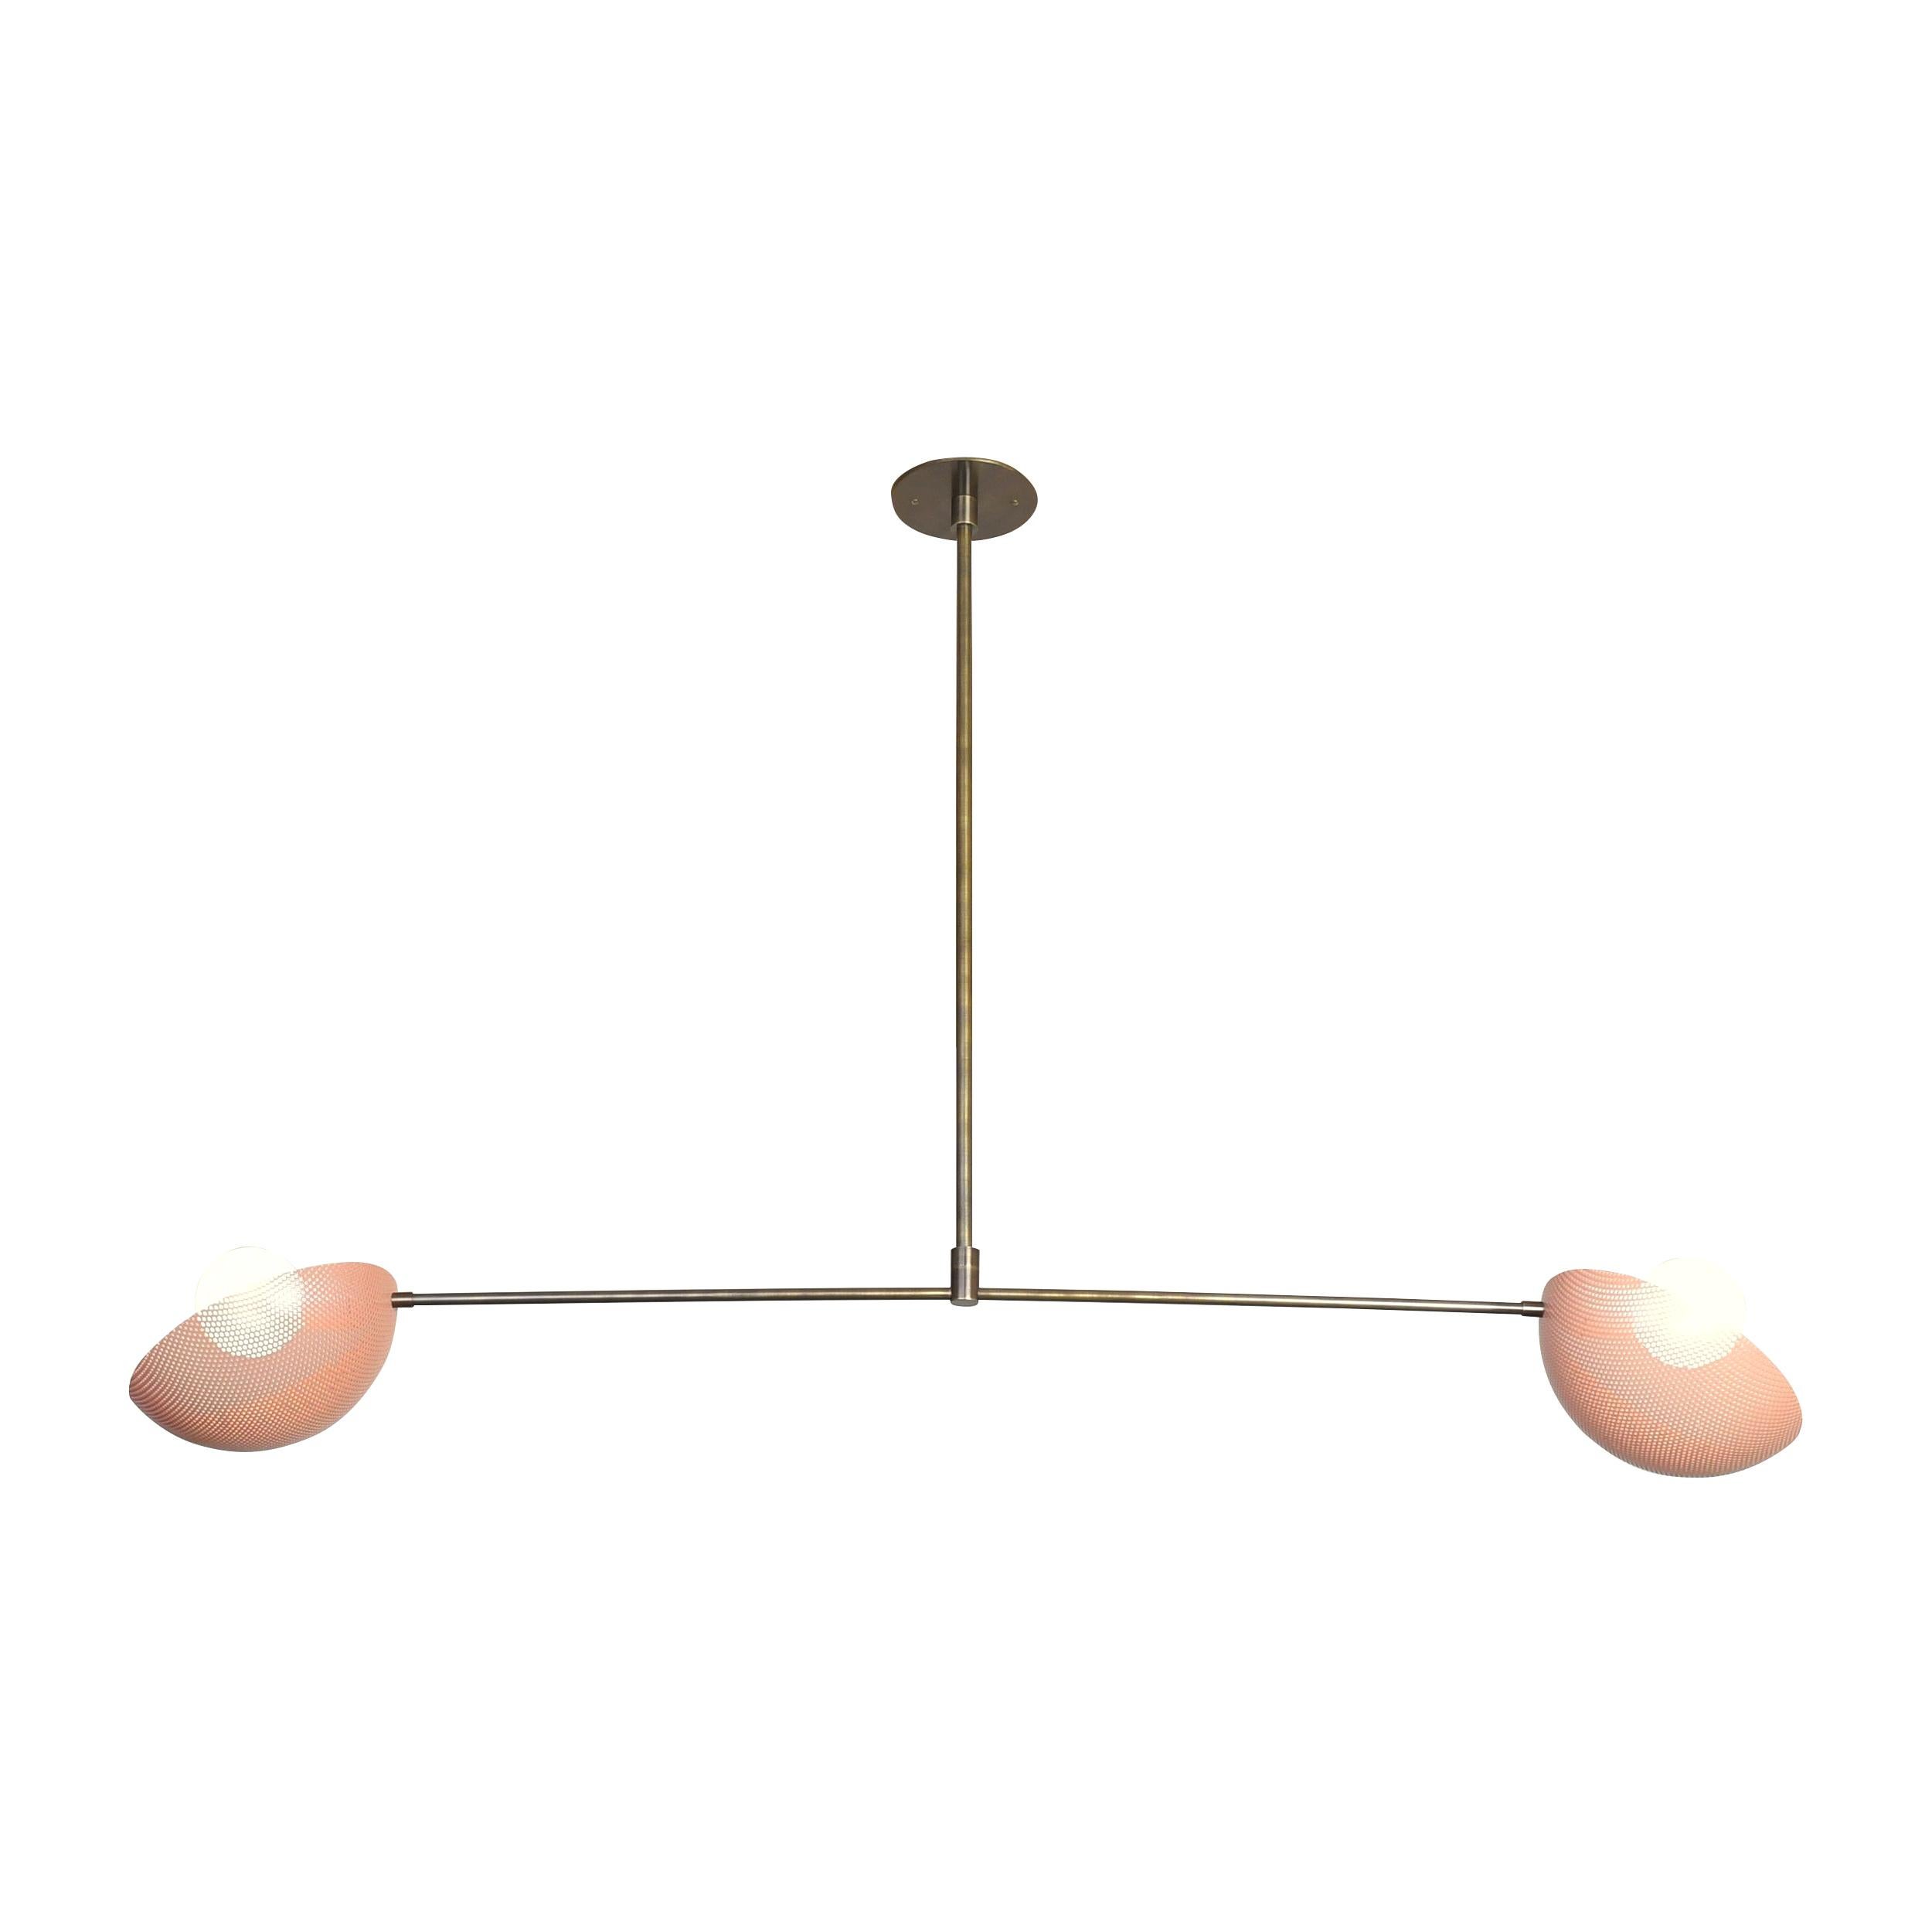 Modern Axial Pendant in Bronze and Pink Enamel by Blueprint Lighting, 2019